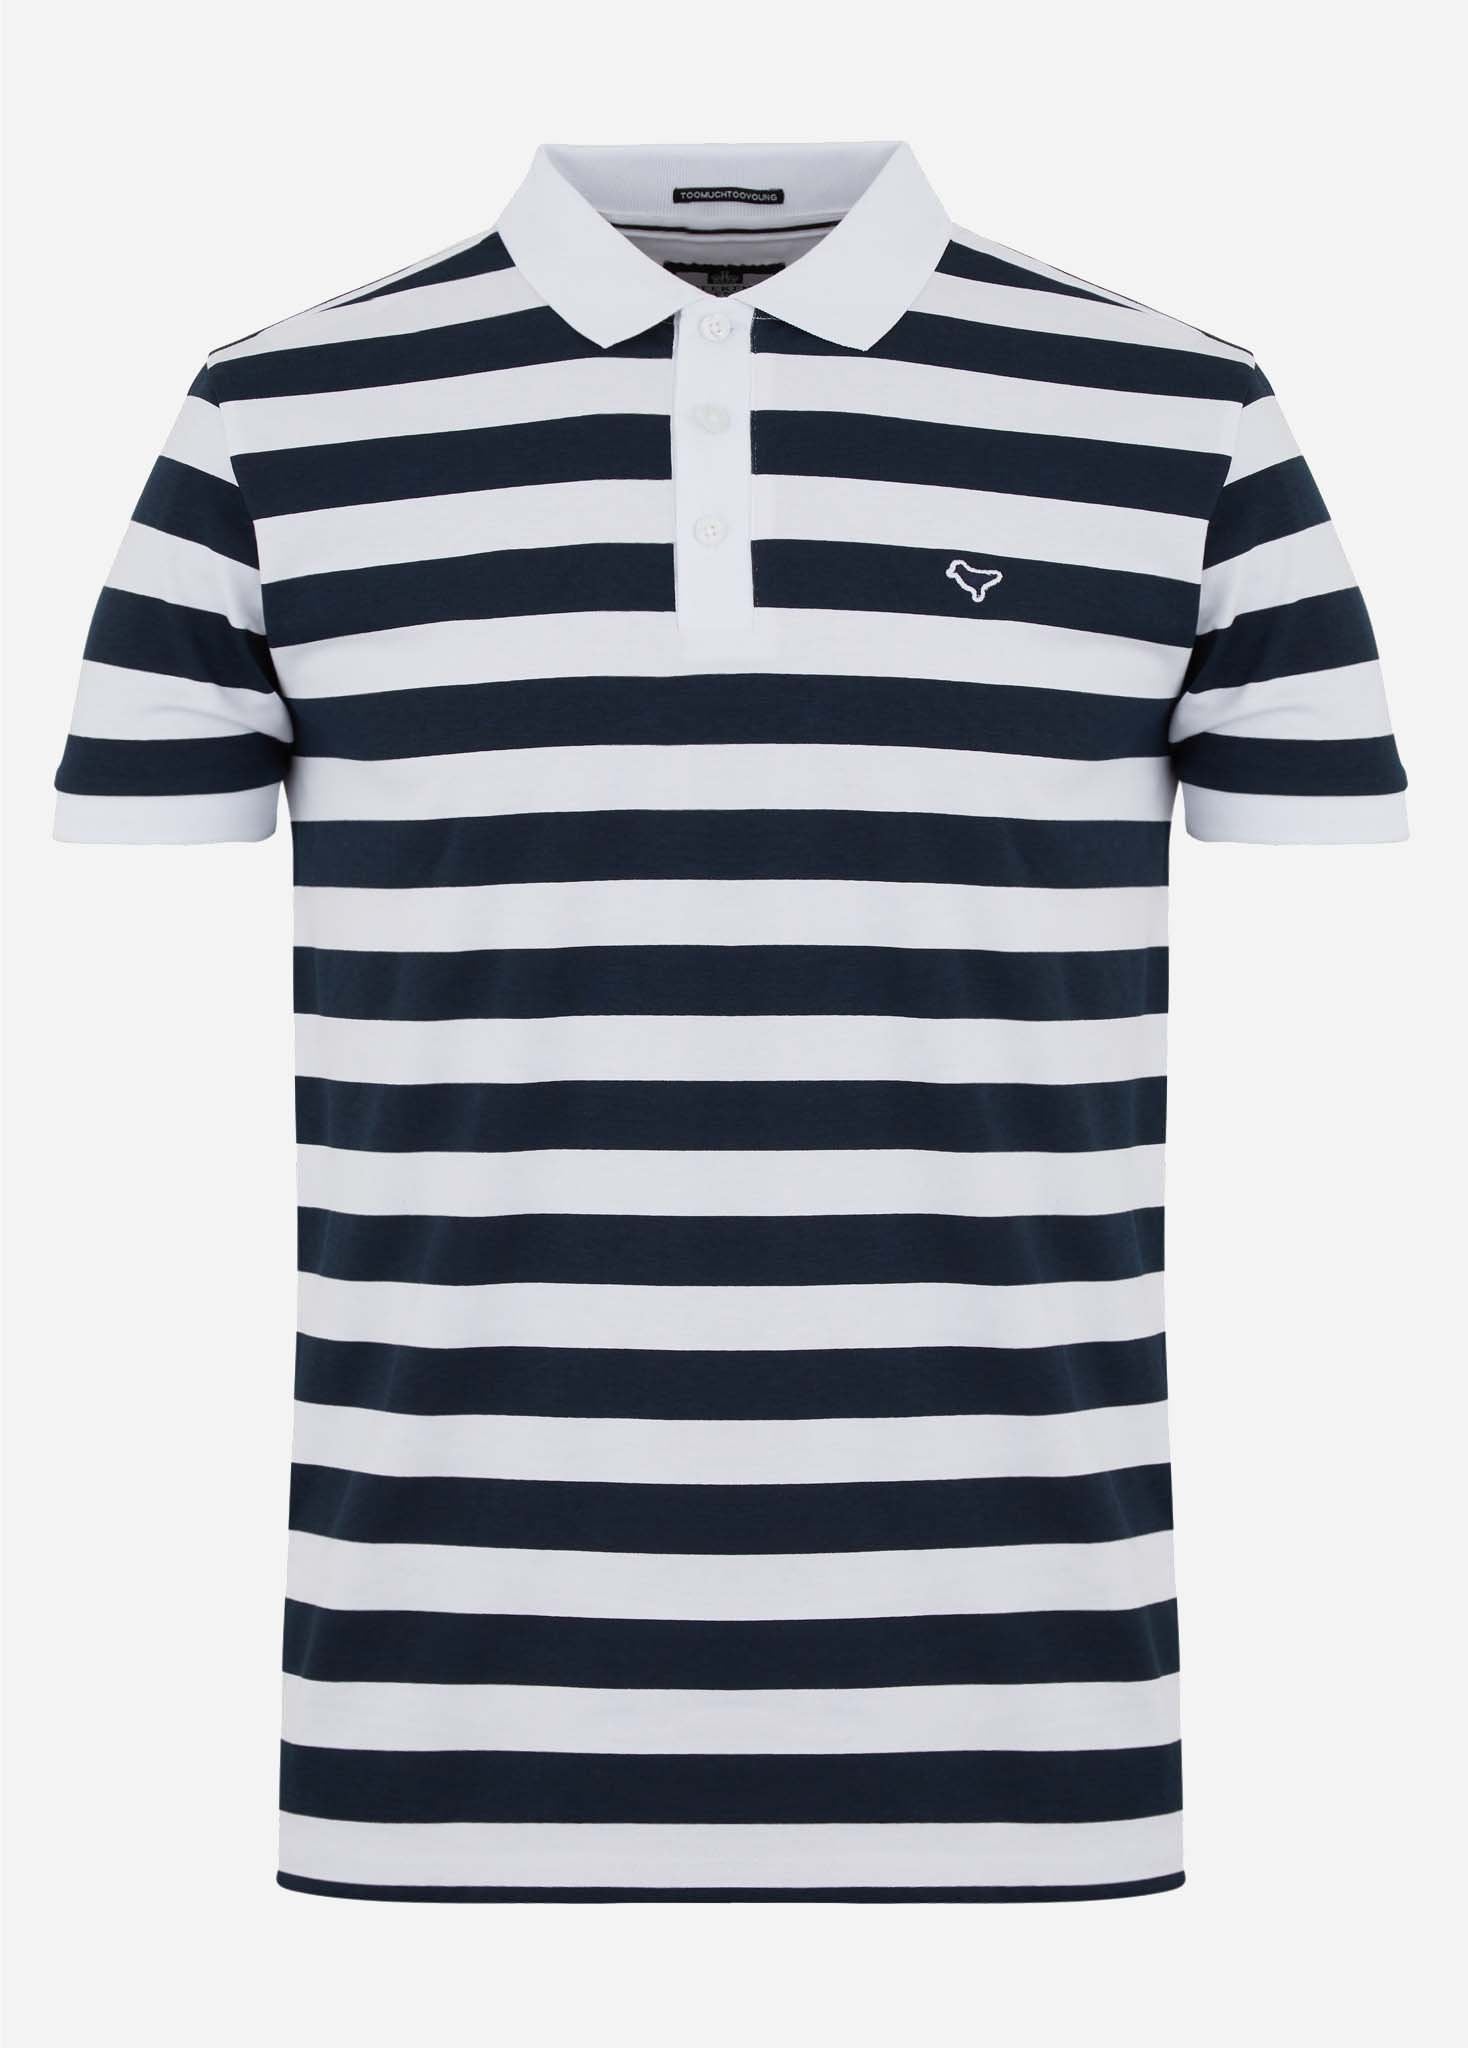 Weekend Offender Polo's  Coffee bay - white 